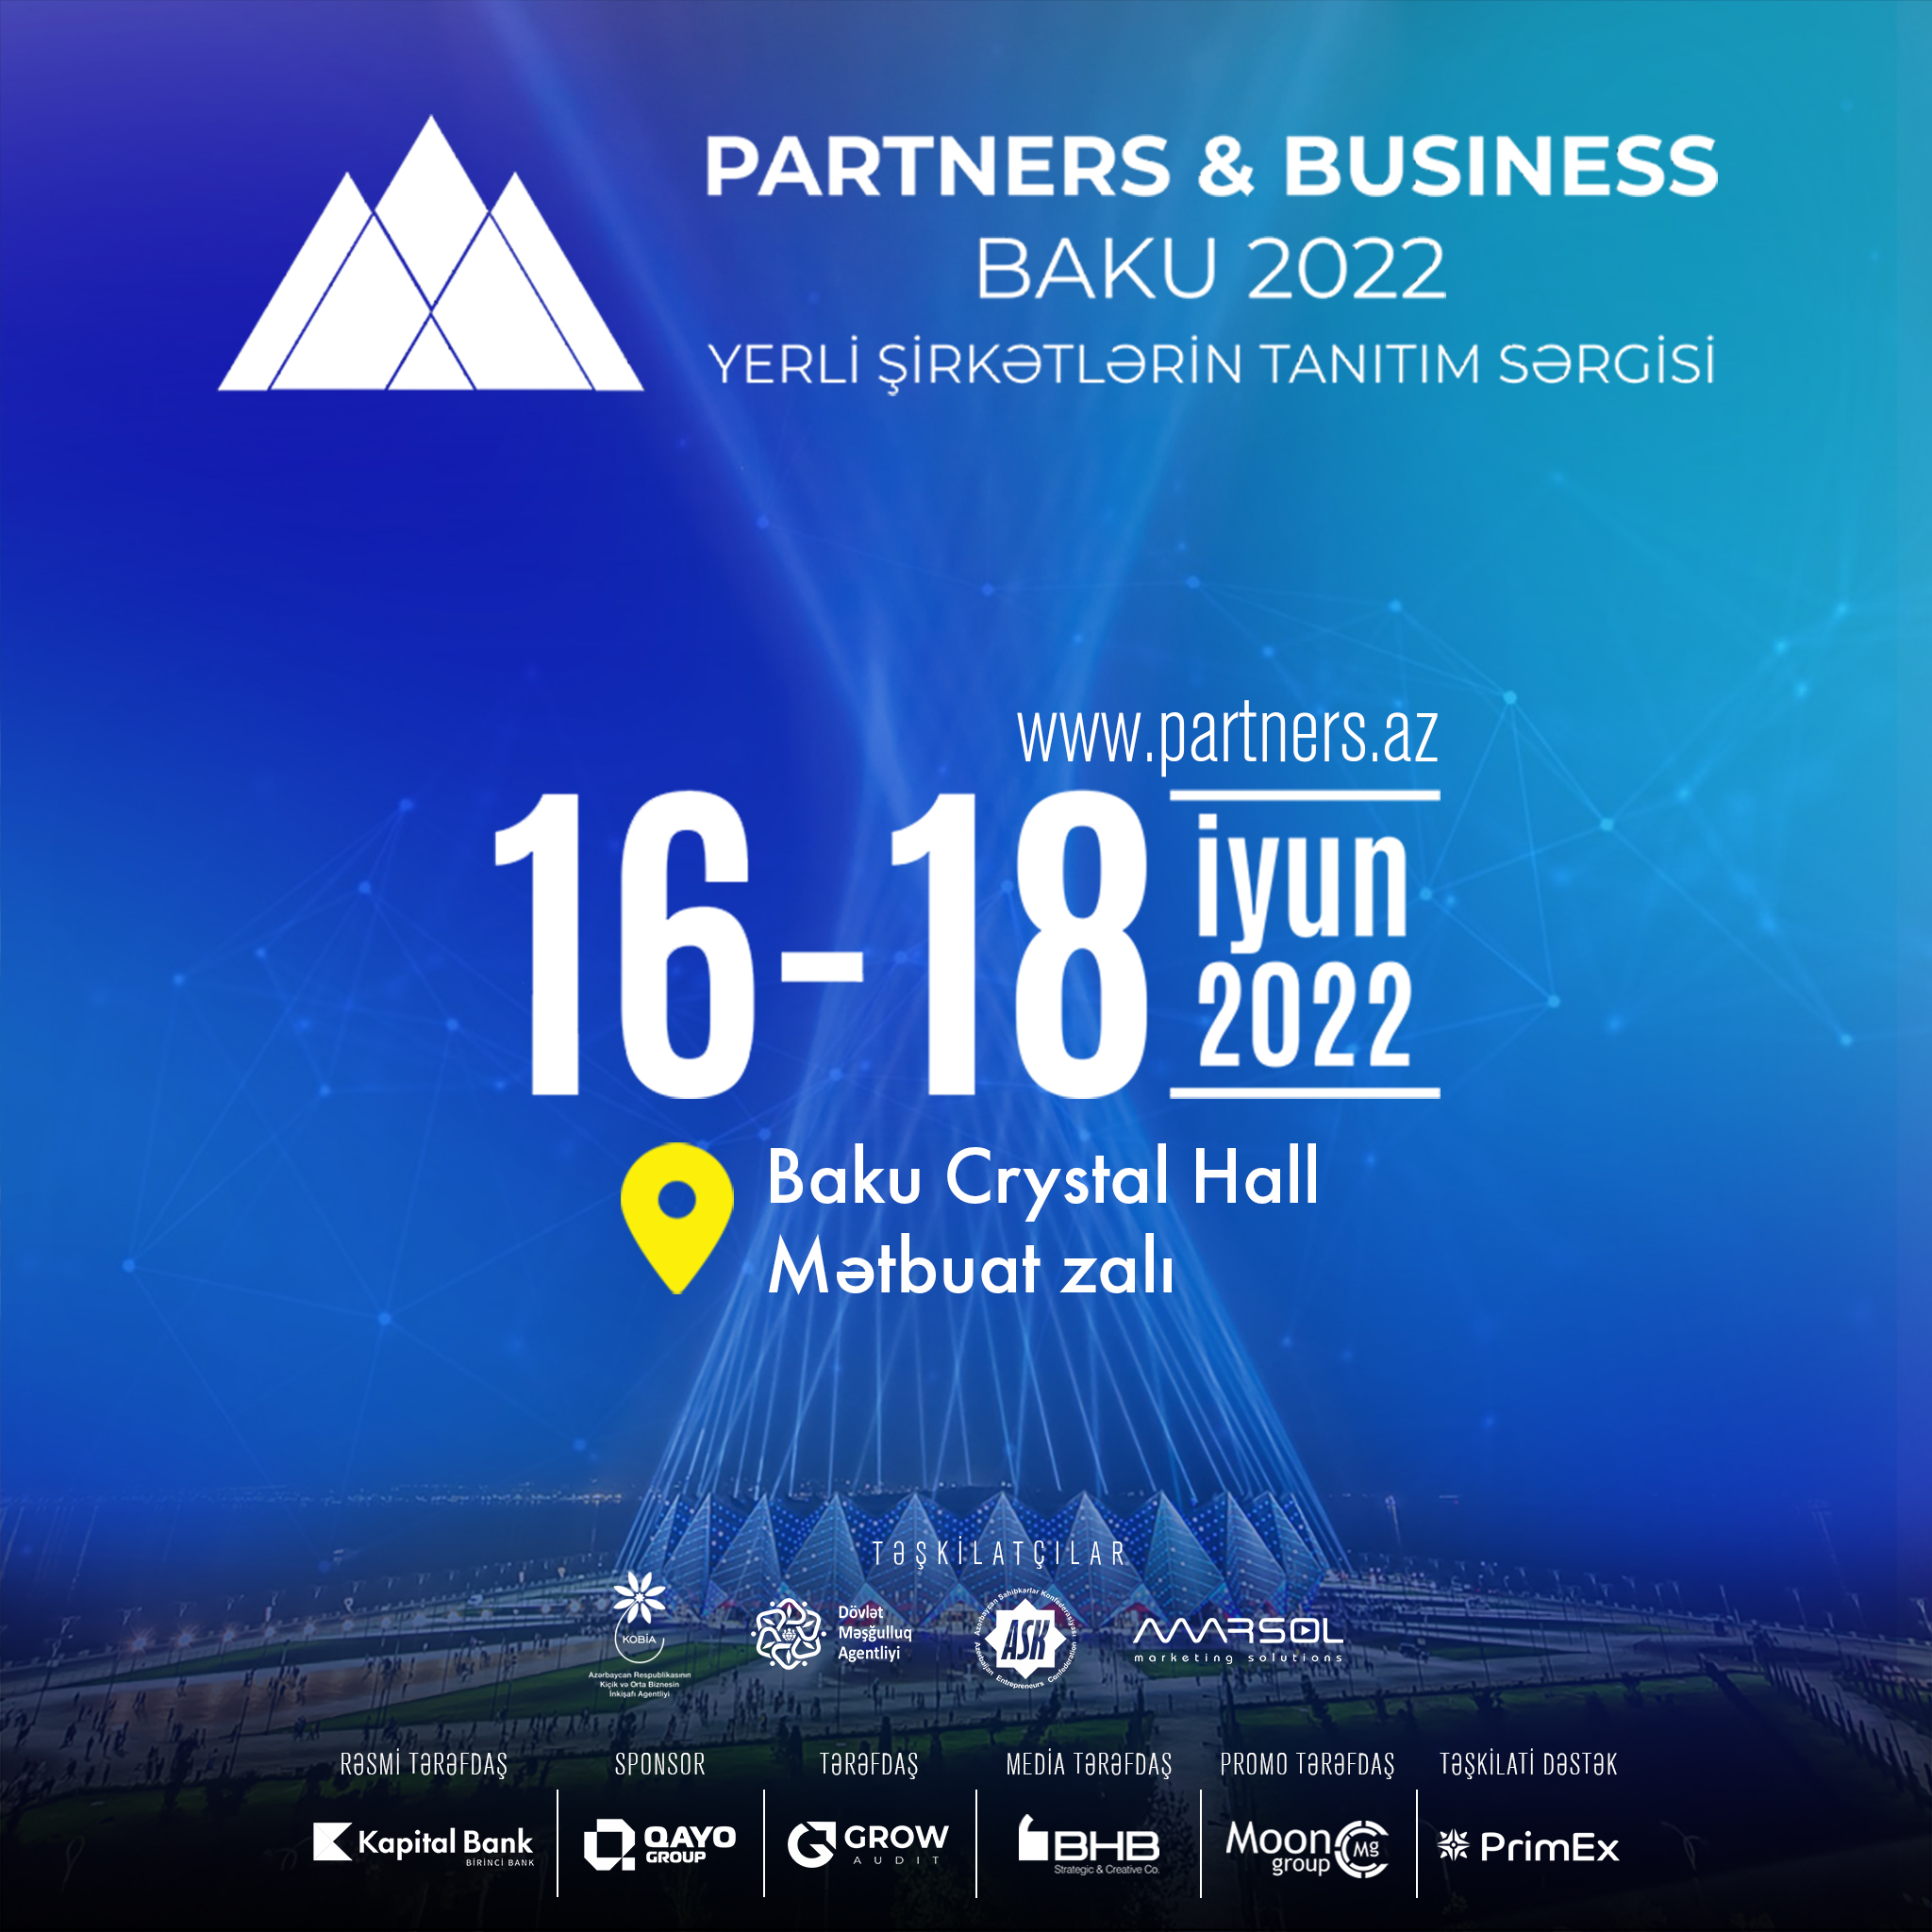 Baku to host Partners & Business exhibition